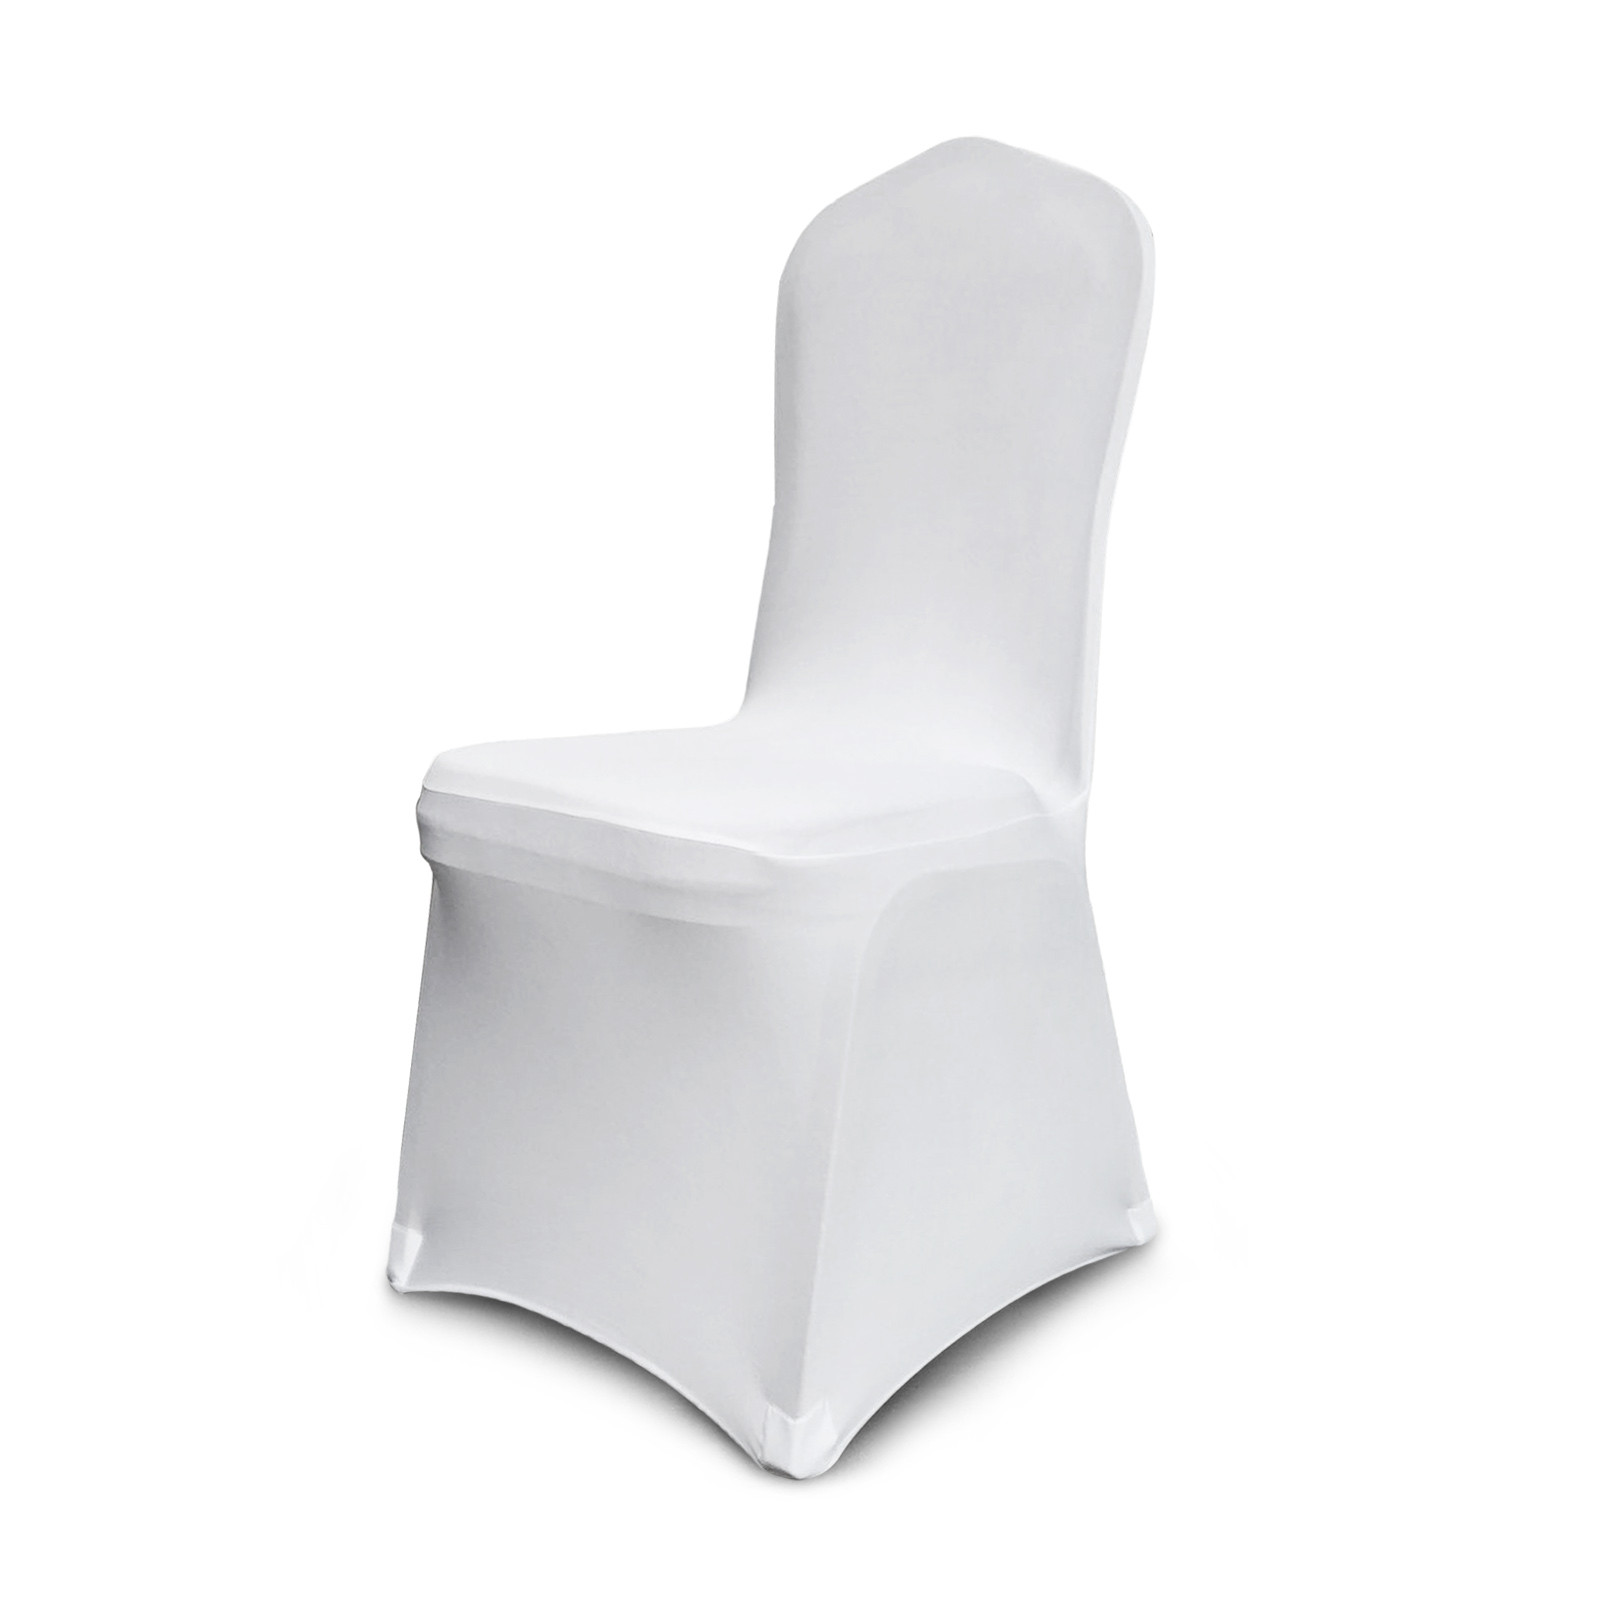 IVhomeshop 5 pcs Arched Front Chair Covers Wedding Anniversary Party Cover Event Dining Banquet Decoration meeting Slipcovers White Lycra Spandex Stretch covers